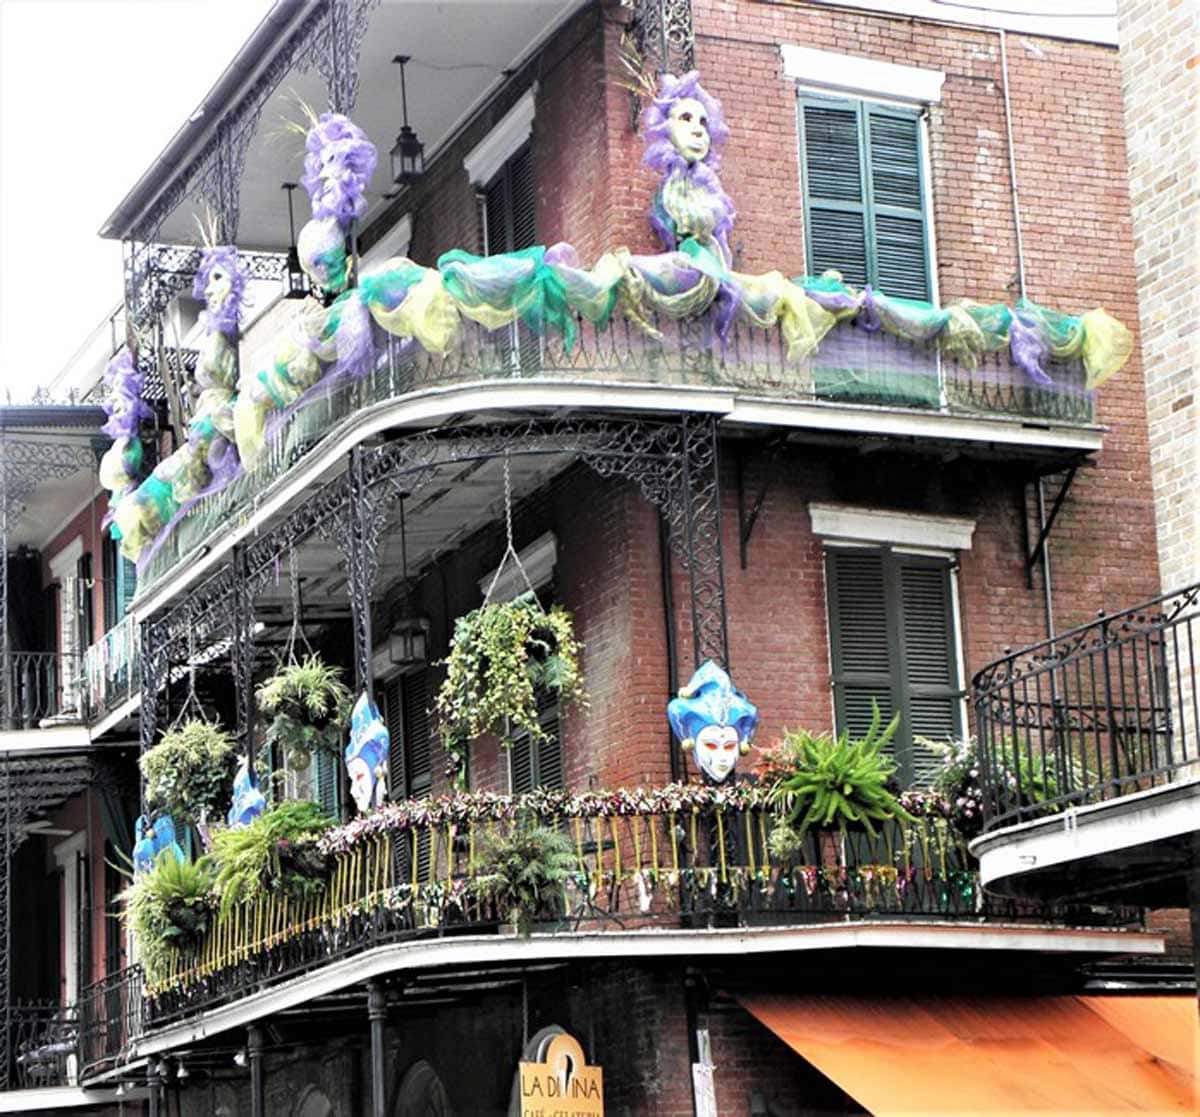 Wrap-around porches, wrought-iron decor and Mardi Gras decorations are often found gracing New Orleans’s architecture. Photo by Victor Block